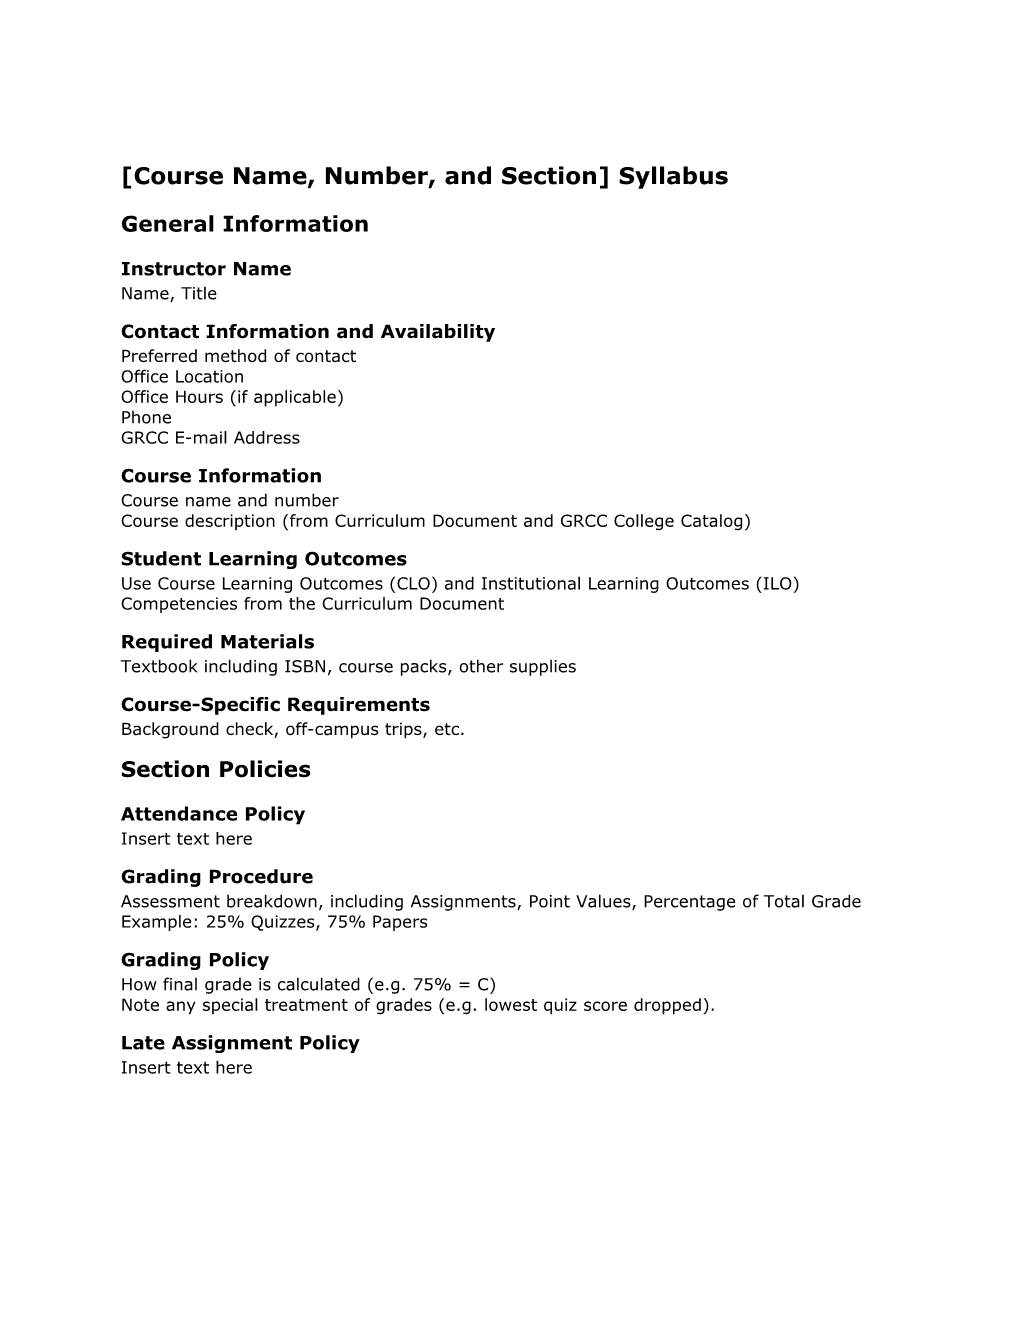 Course Name, Number, and Section Syllabus